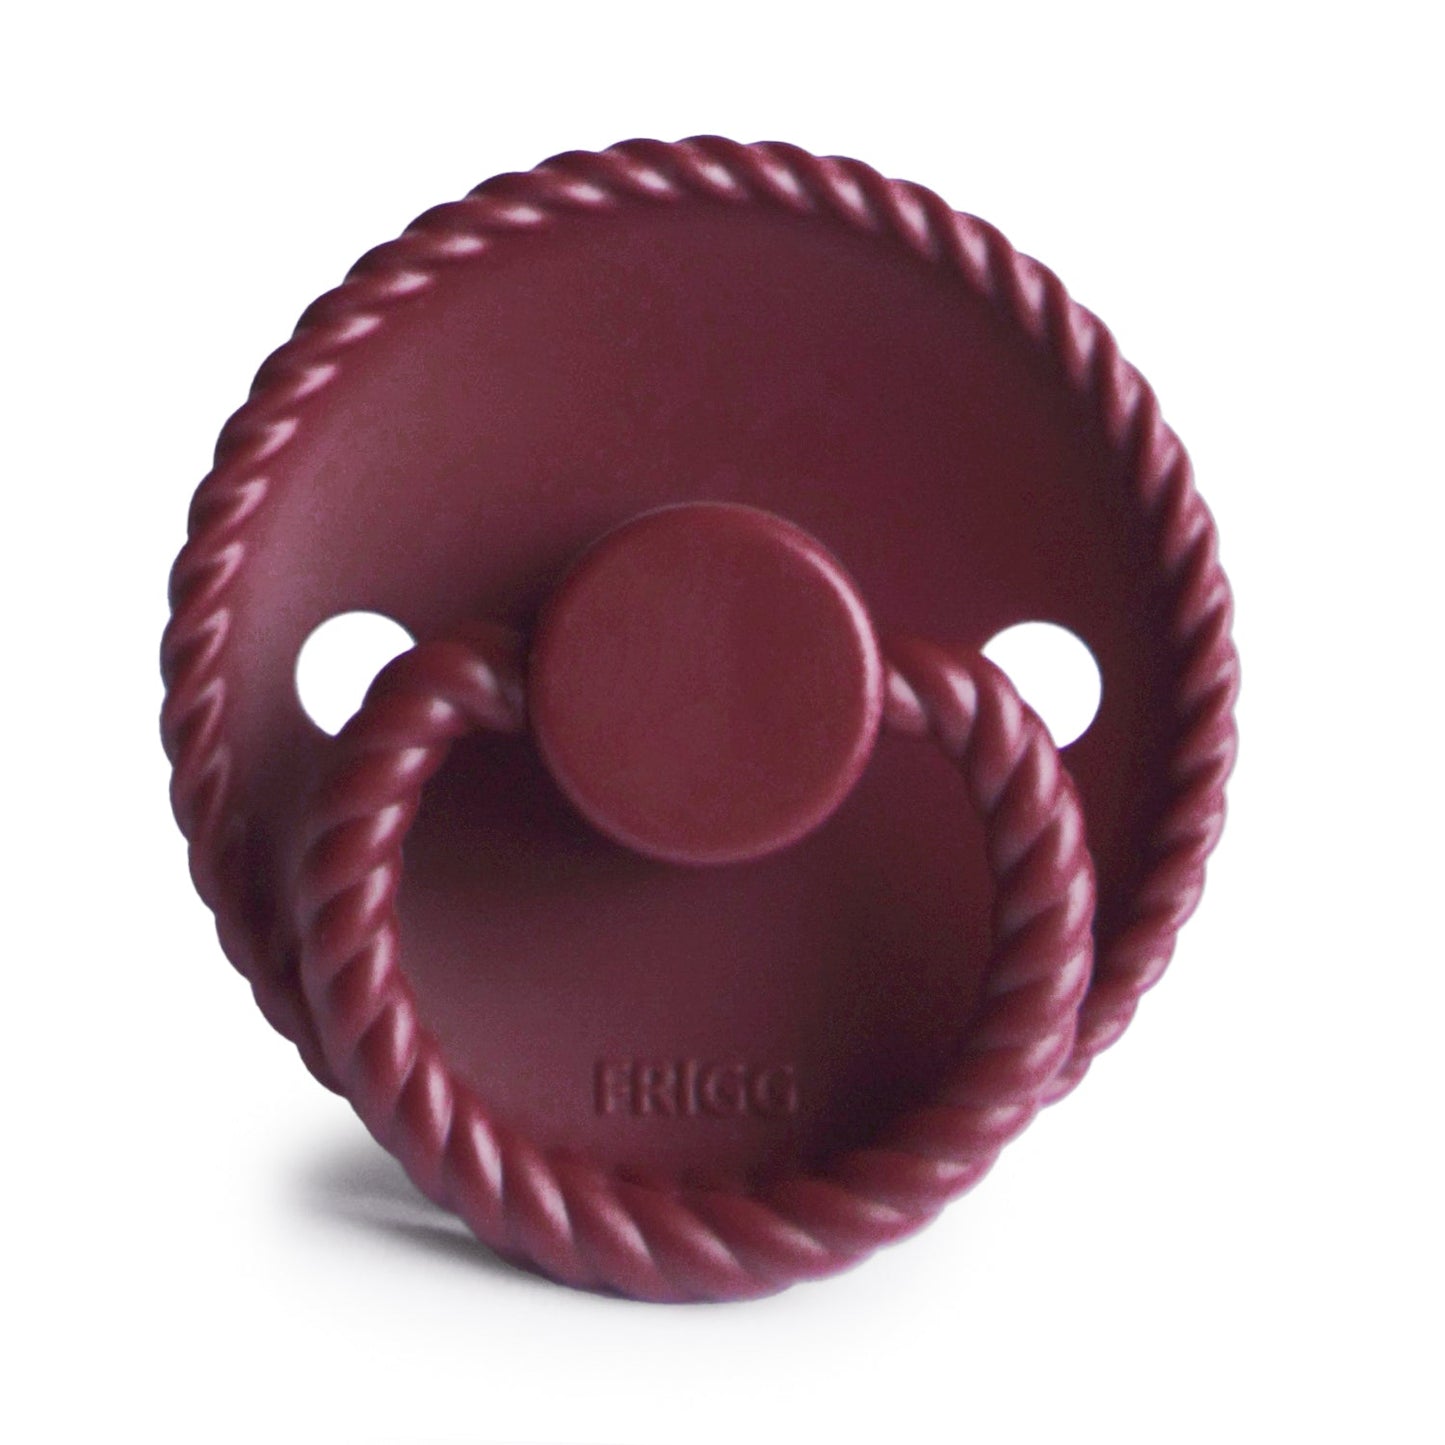 FRIGG Rope Silicone Baby Pacifier 1-Pack Sweet Cherry Size 2 (6-18 Months)